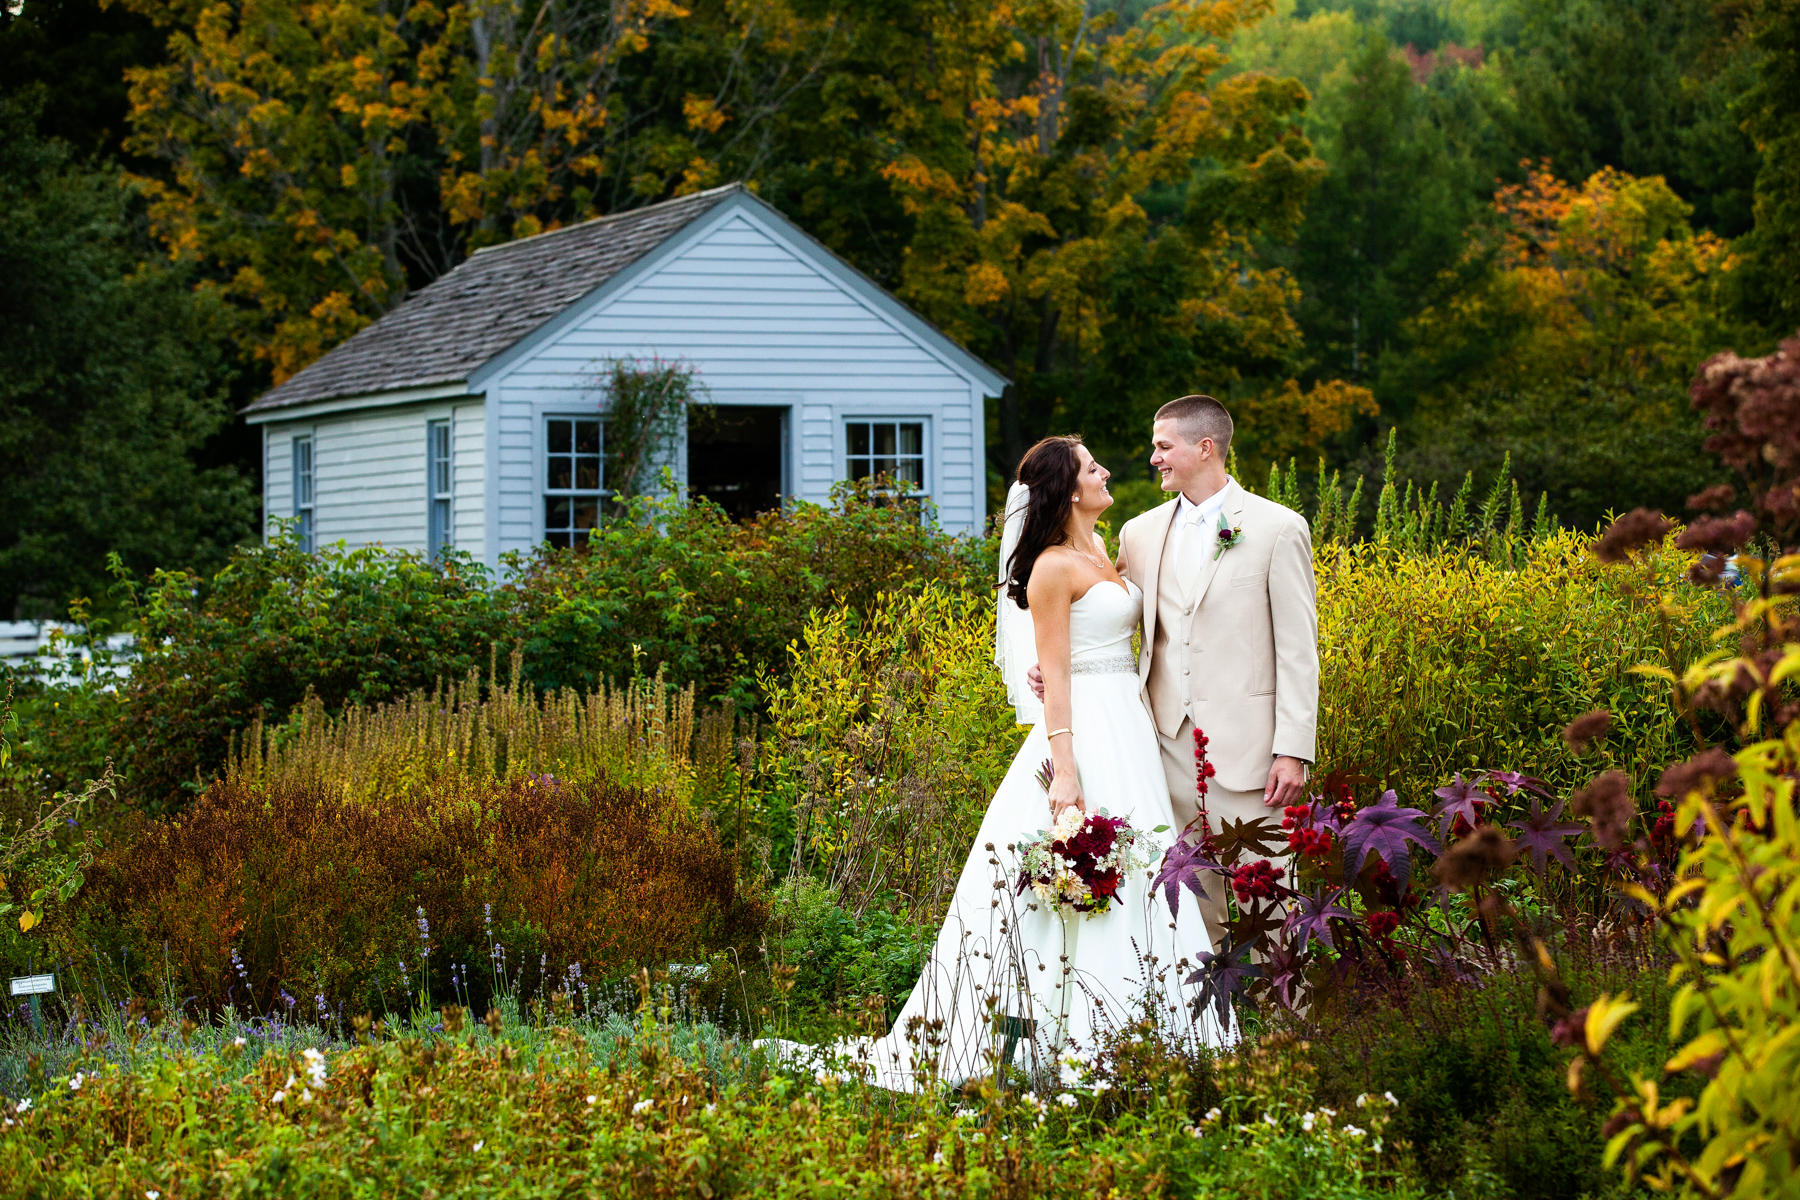 The bride and groom in front of a vibrant and colorful flower garden